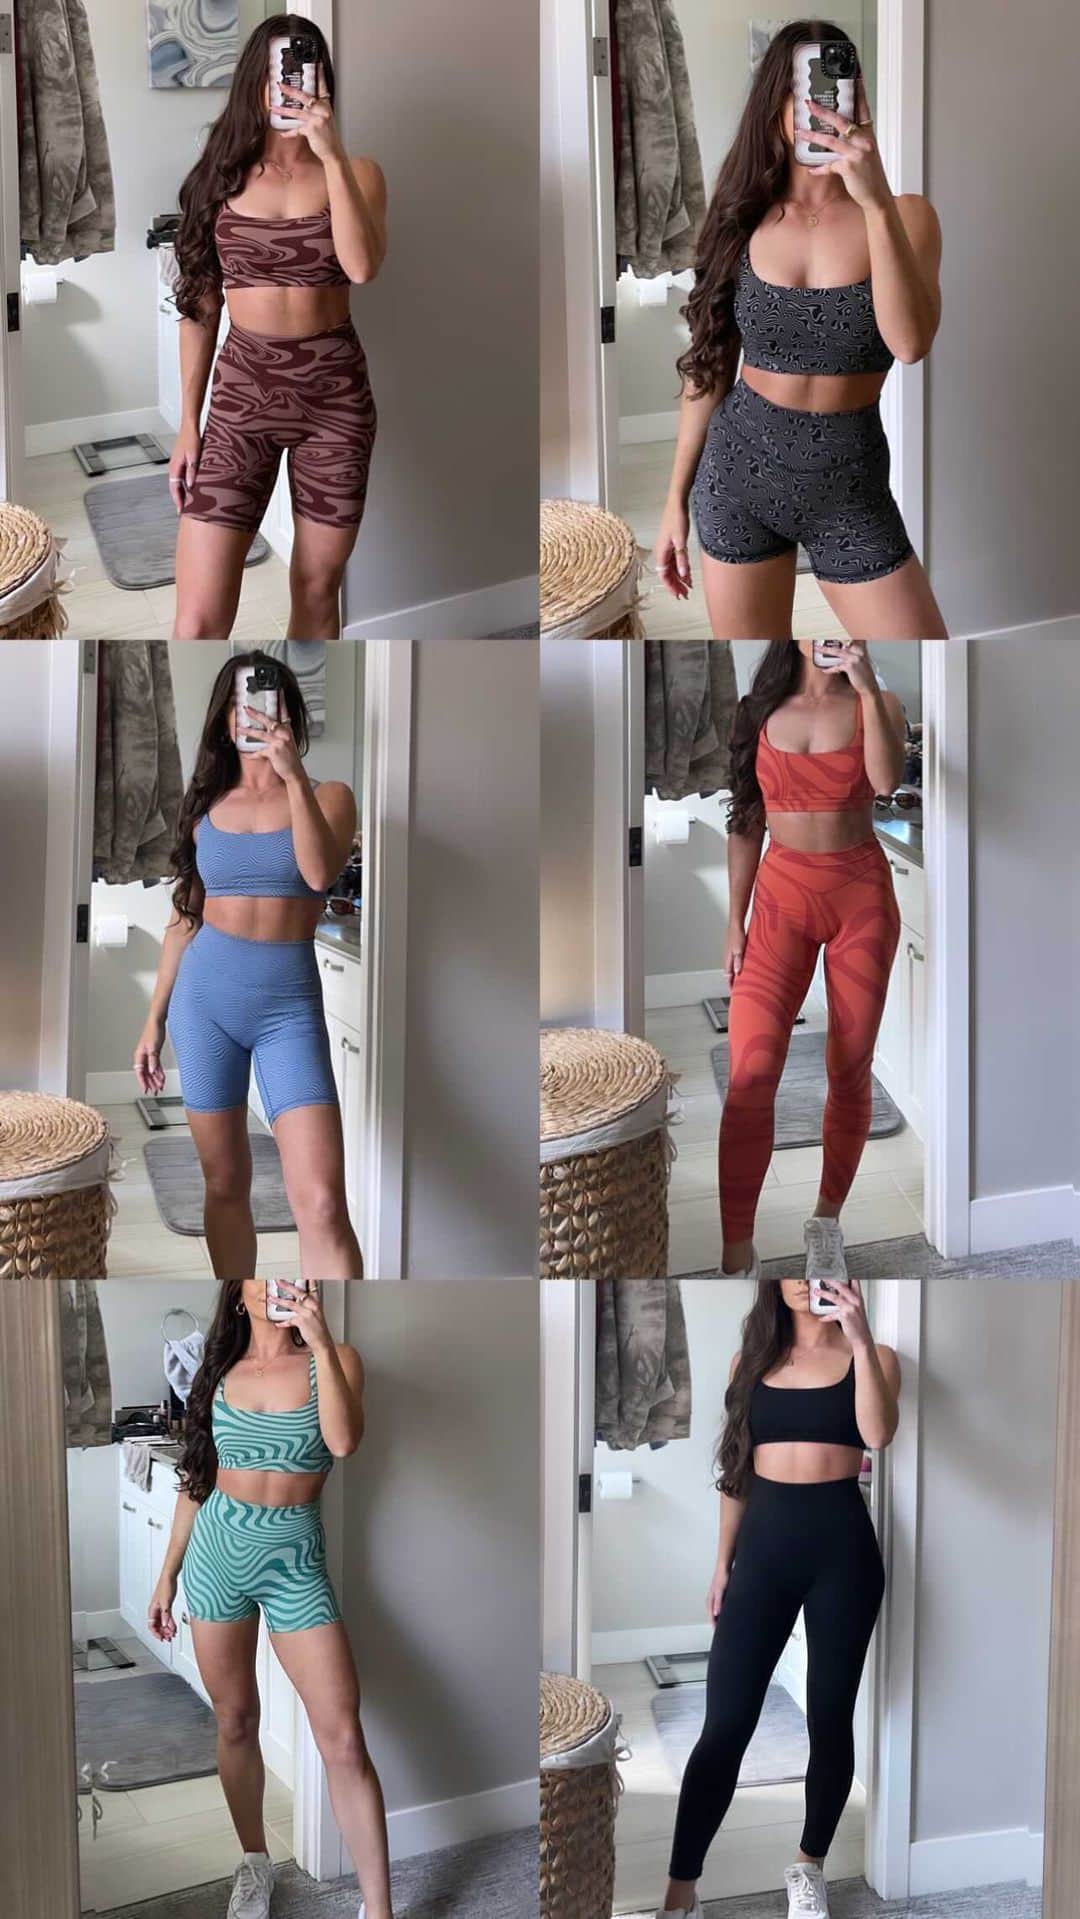 Paige Reillyのインスタグラム：「Panorama try on haul! Launching Monday 9/27 at noon MT 🤎⁣ ⁣ Stats:⁣ 5’2” 115lbs⁣ 25” waist⁣ 34A bust⁣  SMALL (A-C cup) bra⁣ XS in all bottoms⁣ ⁣ Let me know if you have any other questions down below! I also will be doing a question box on my stories tomorrow 🤎」